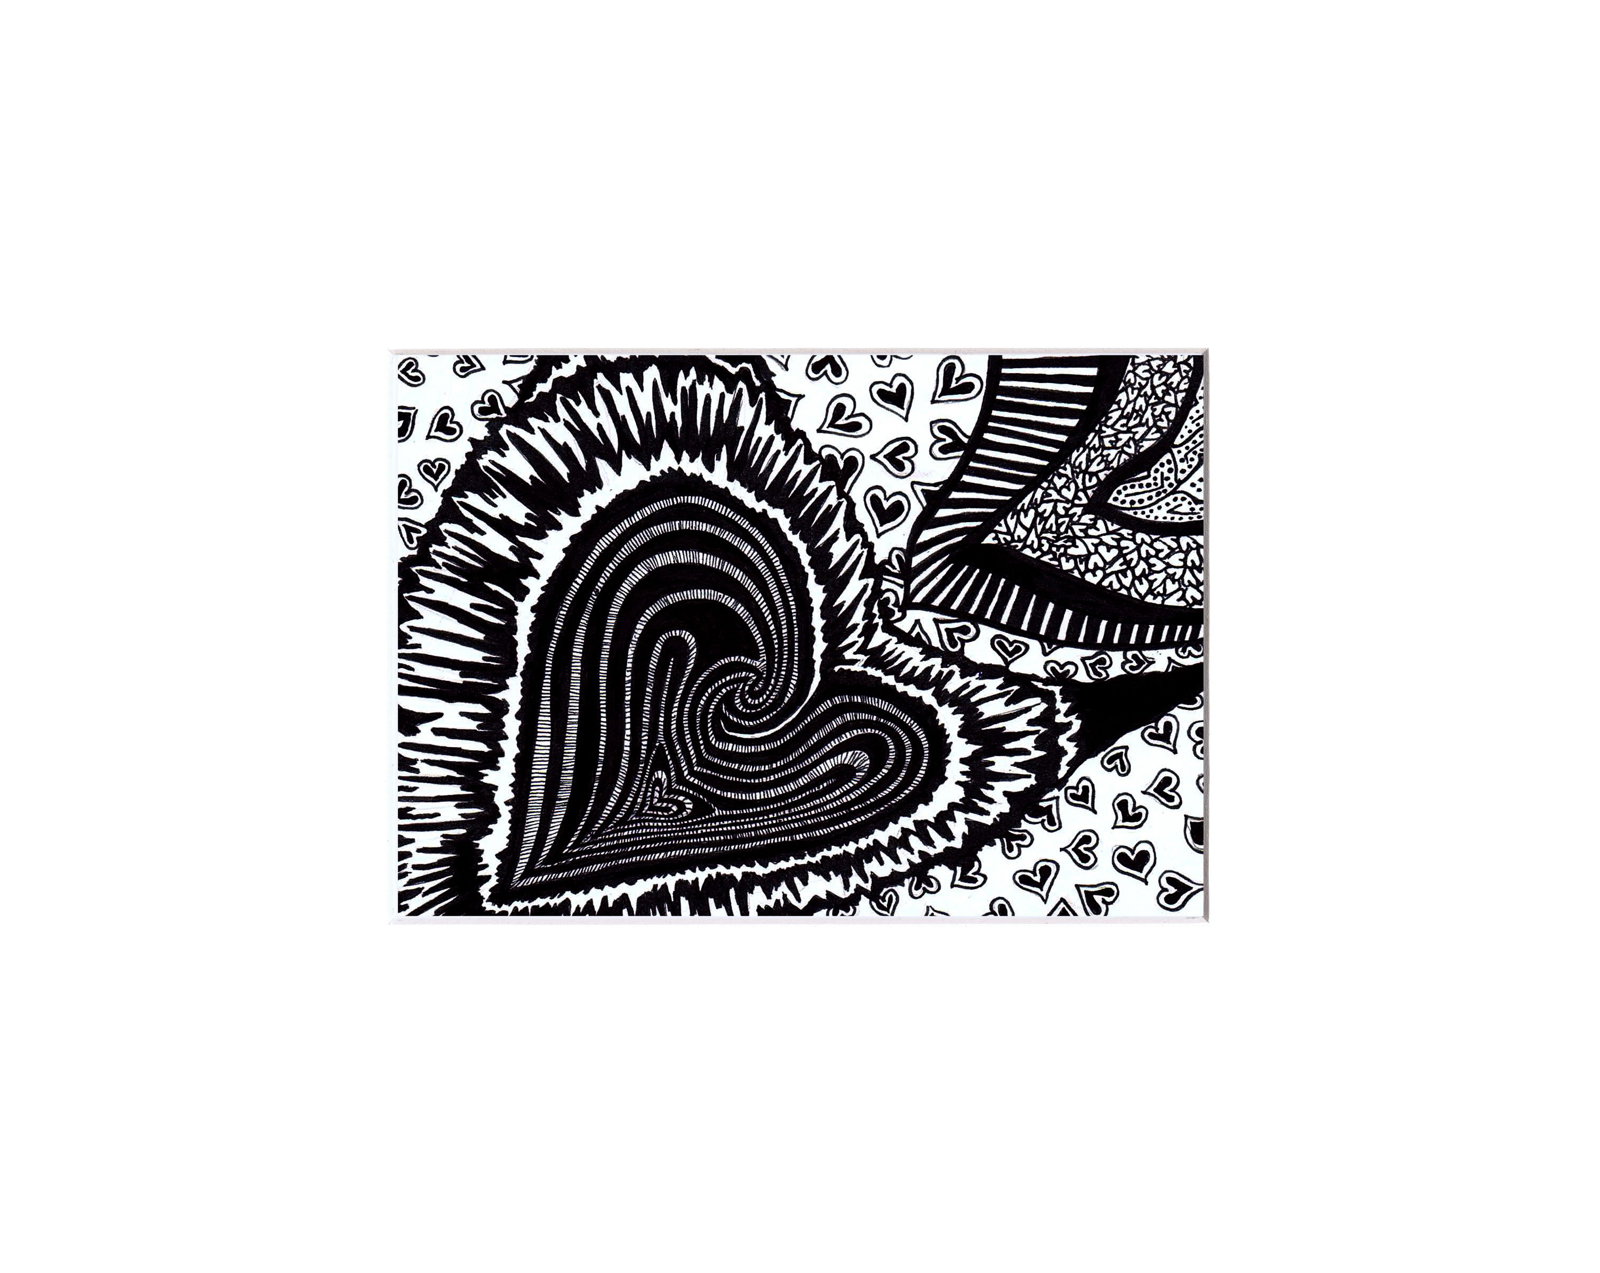 Photo by CRD Larson Art with the username @CRDLarson, who is a verified user,  September 1, 2019 at 9:25 AM. The post is about the topic Buttholes and the text says 'My original drawing 'Dark Heart' - ink on paper; an anal #gape in the shape of a #heart. Abstract enough that some don't recognize that it's eroticart.

#anal #eroticart #eroticartist'